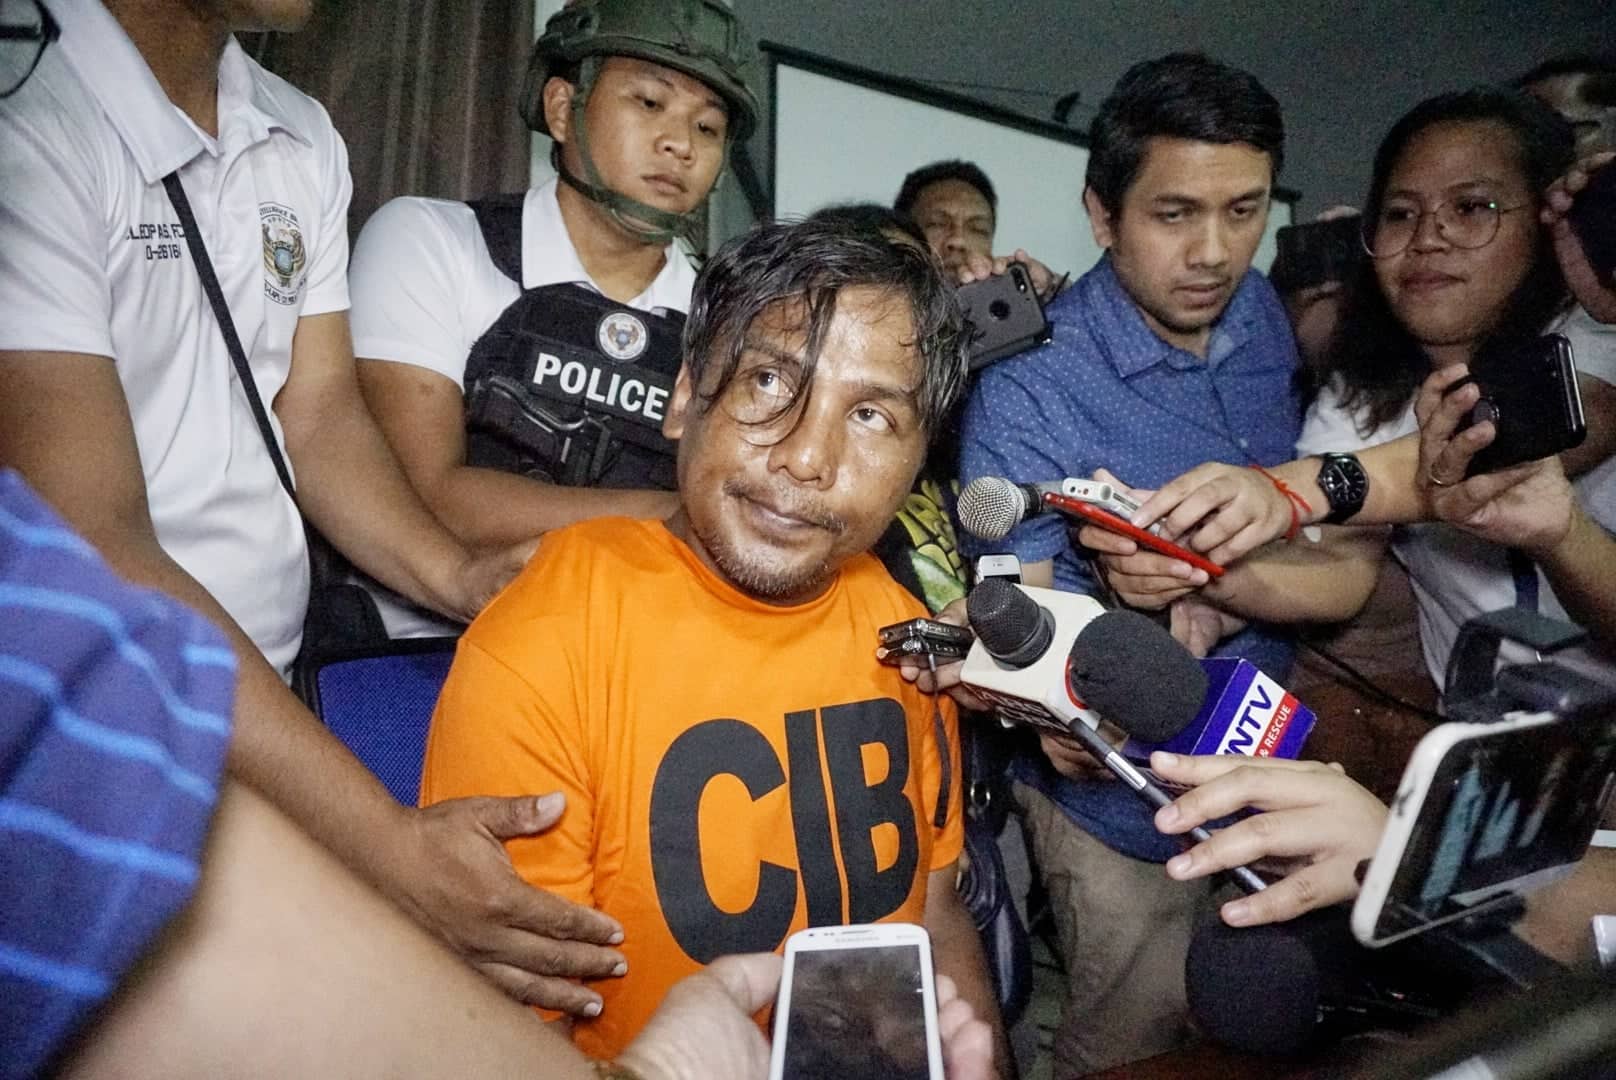 Renato Bayuban Llenes, the self-confessed suspect in the murder of Christine Lee Silawan, is presented to the media at the Camp Sergio Osmeña